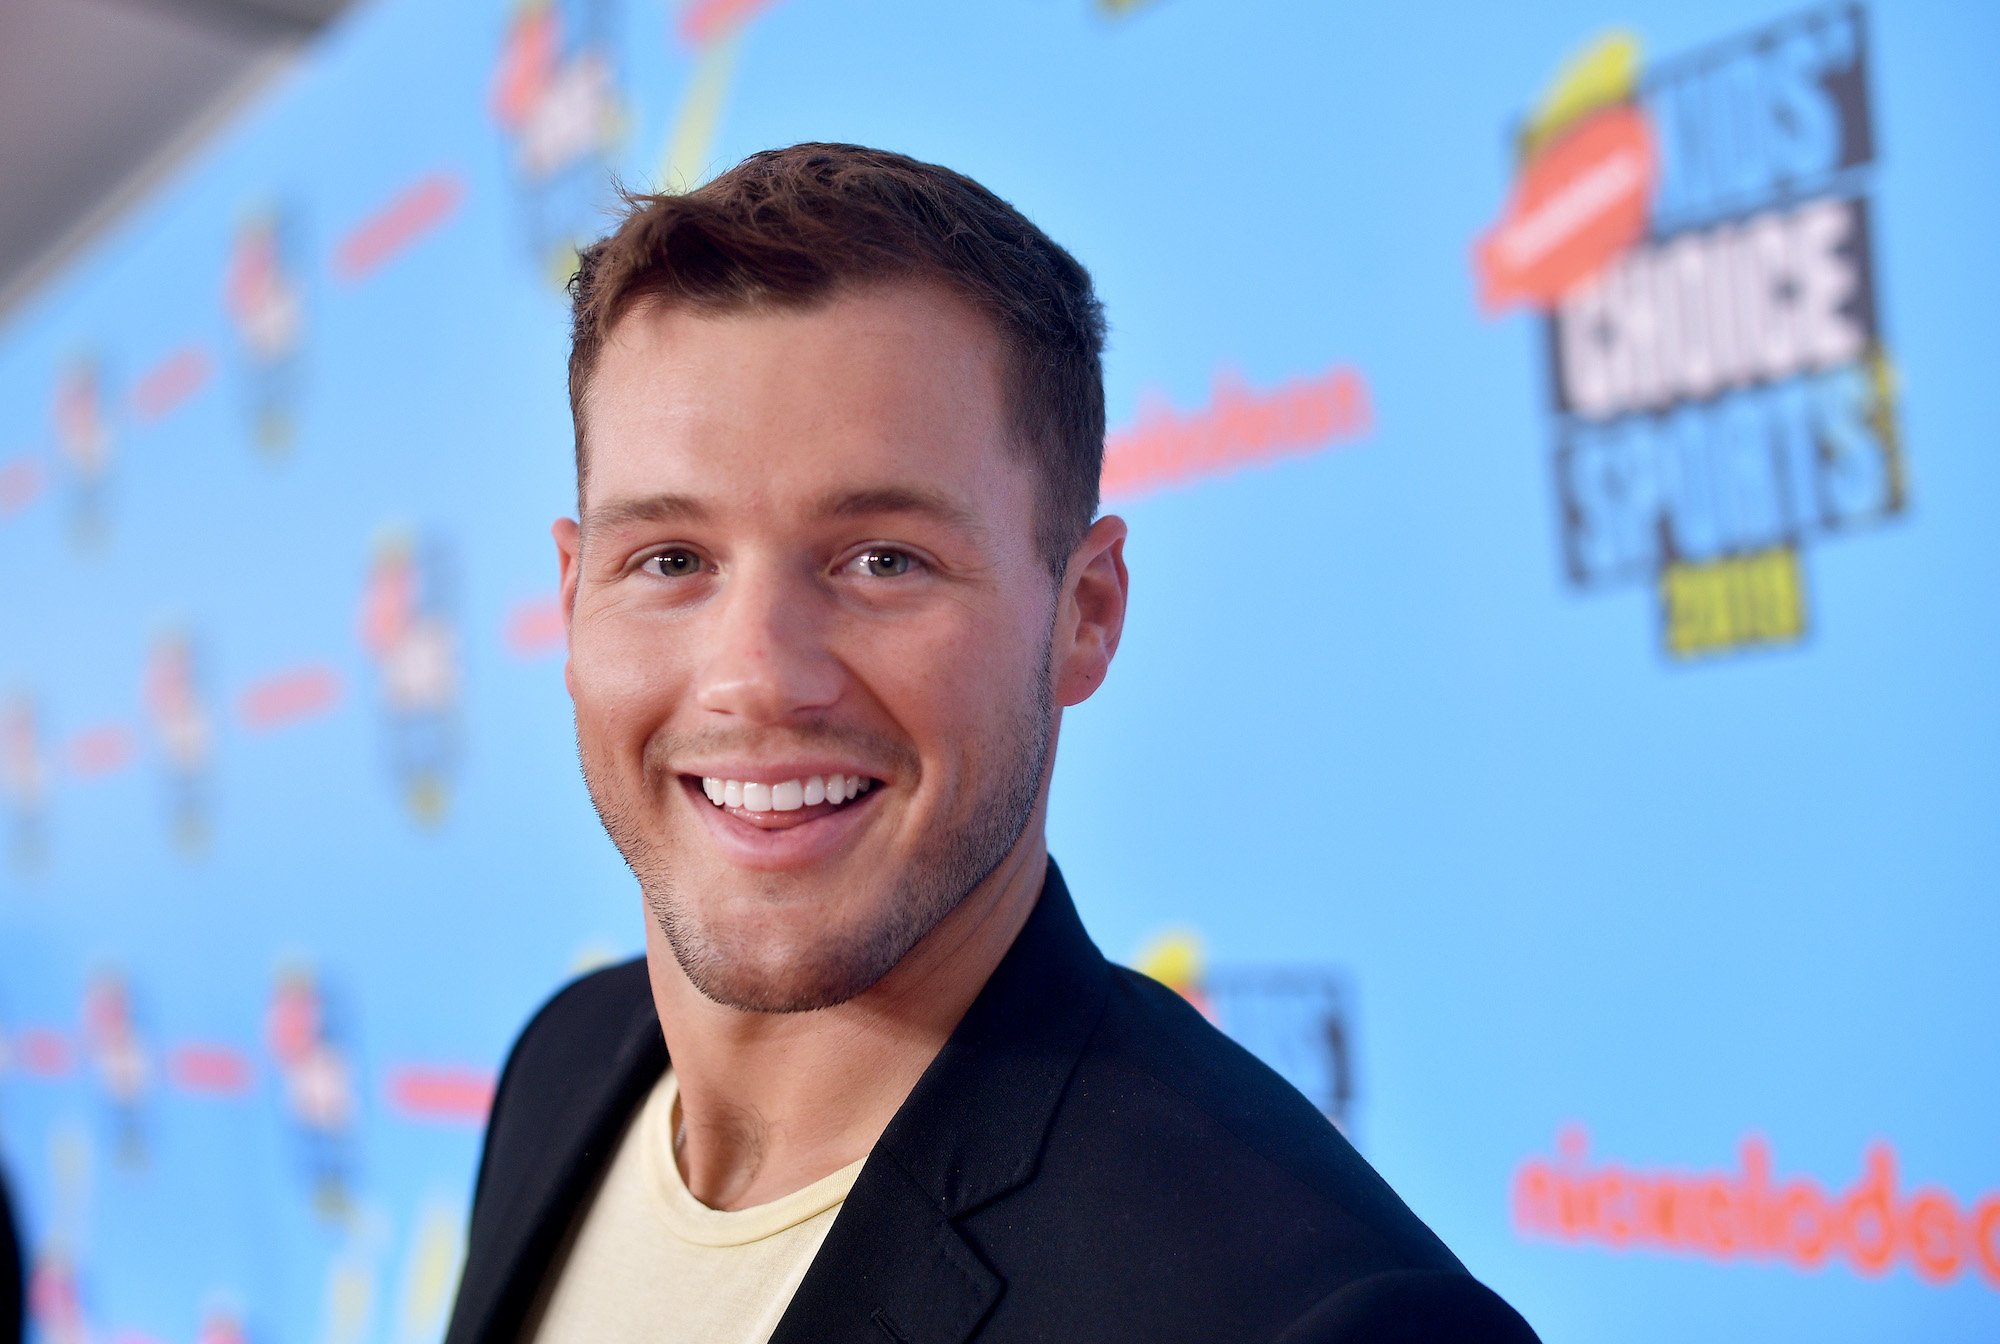 Colton Underwood smiling in front of a blue background